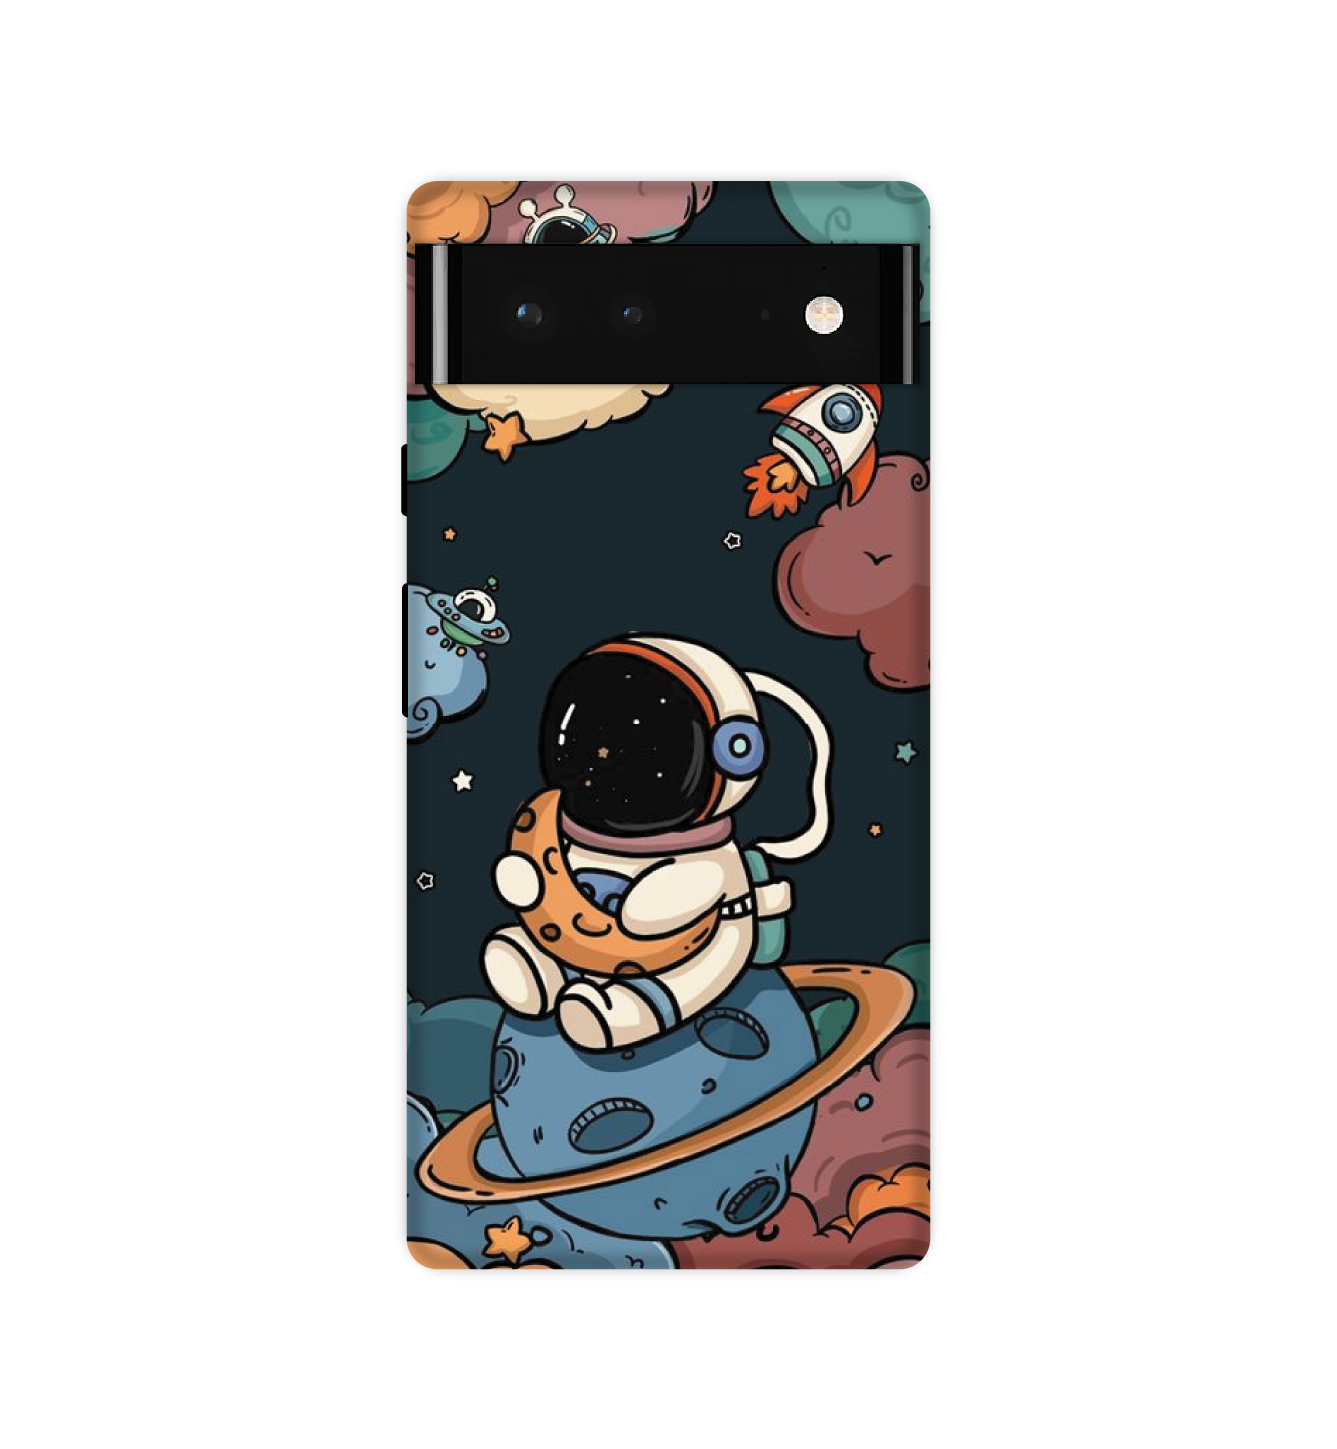 Cute Astronaut - Hard Cases For Google Models